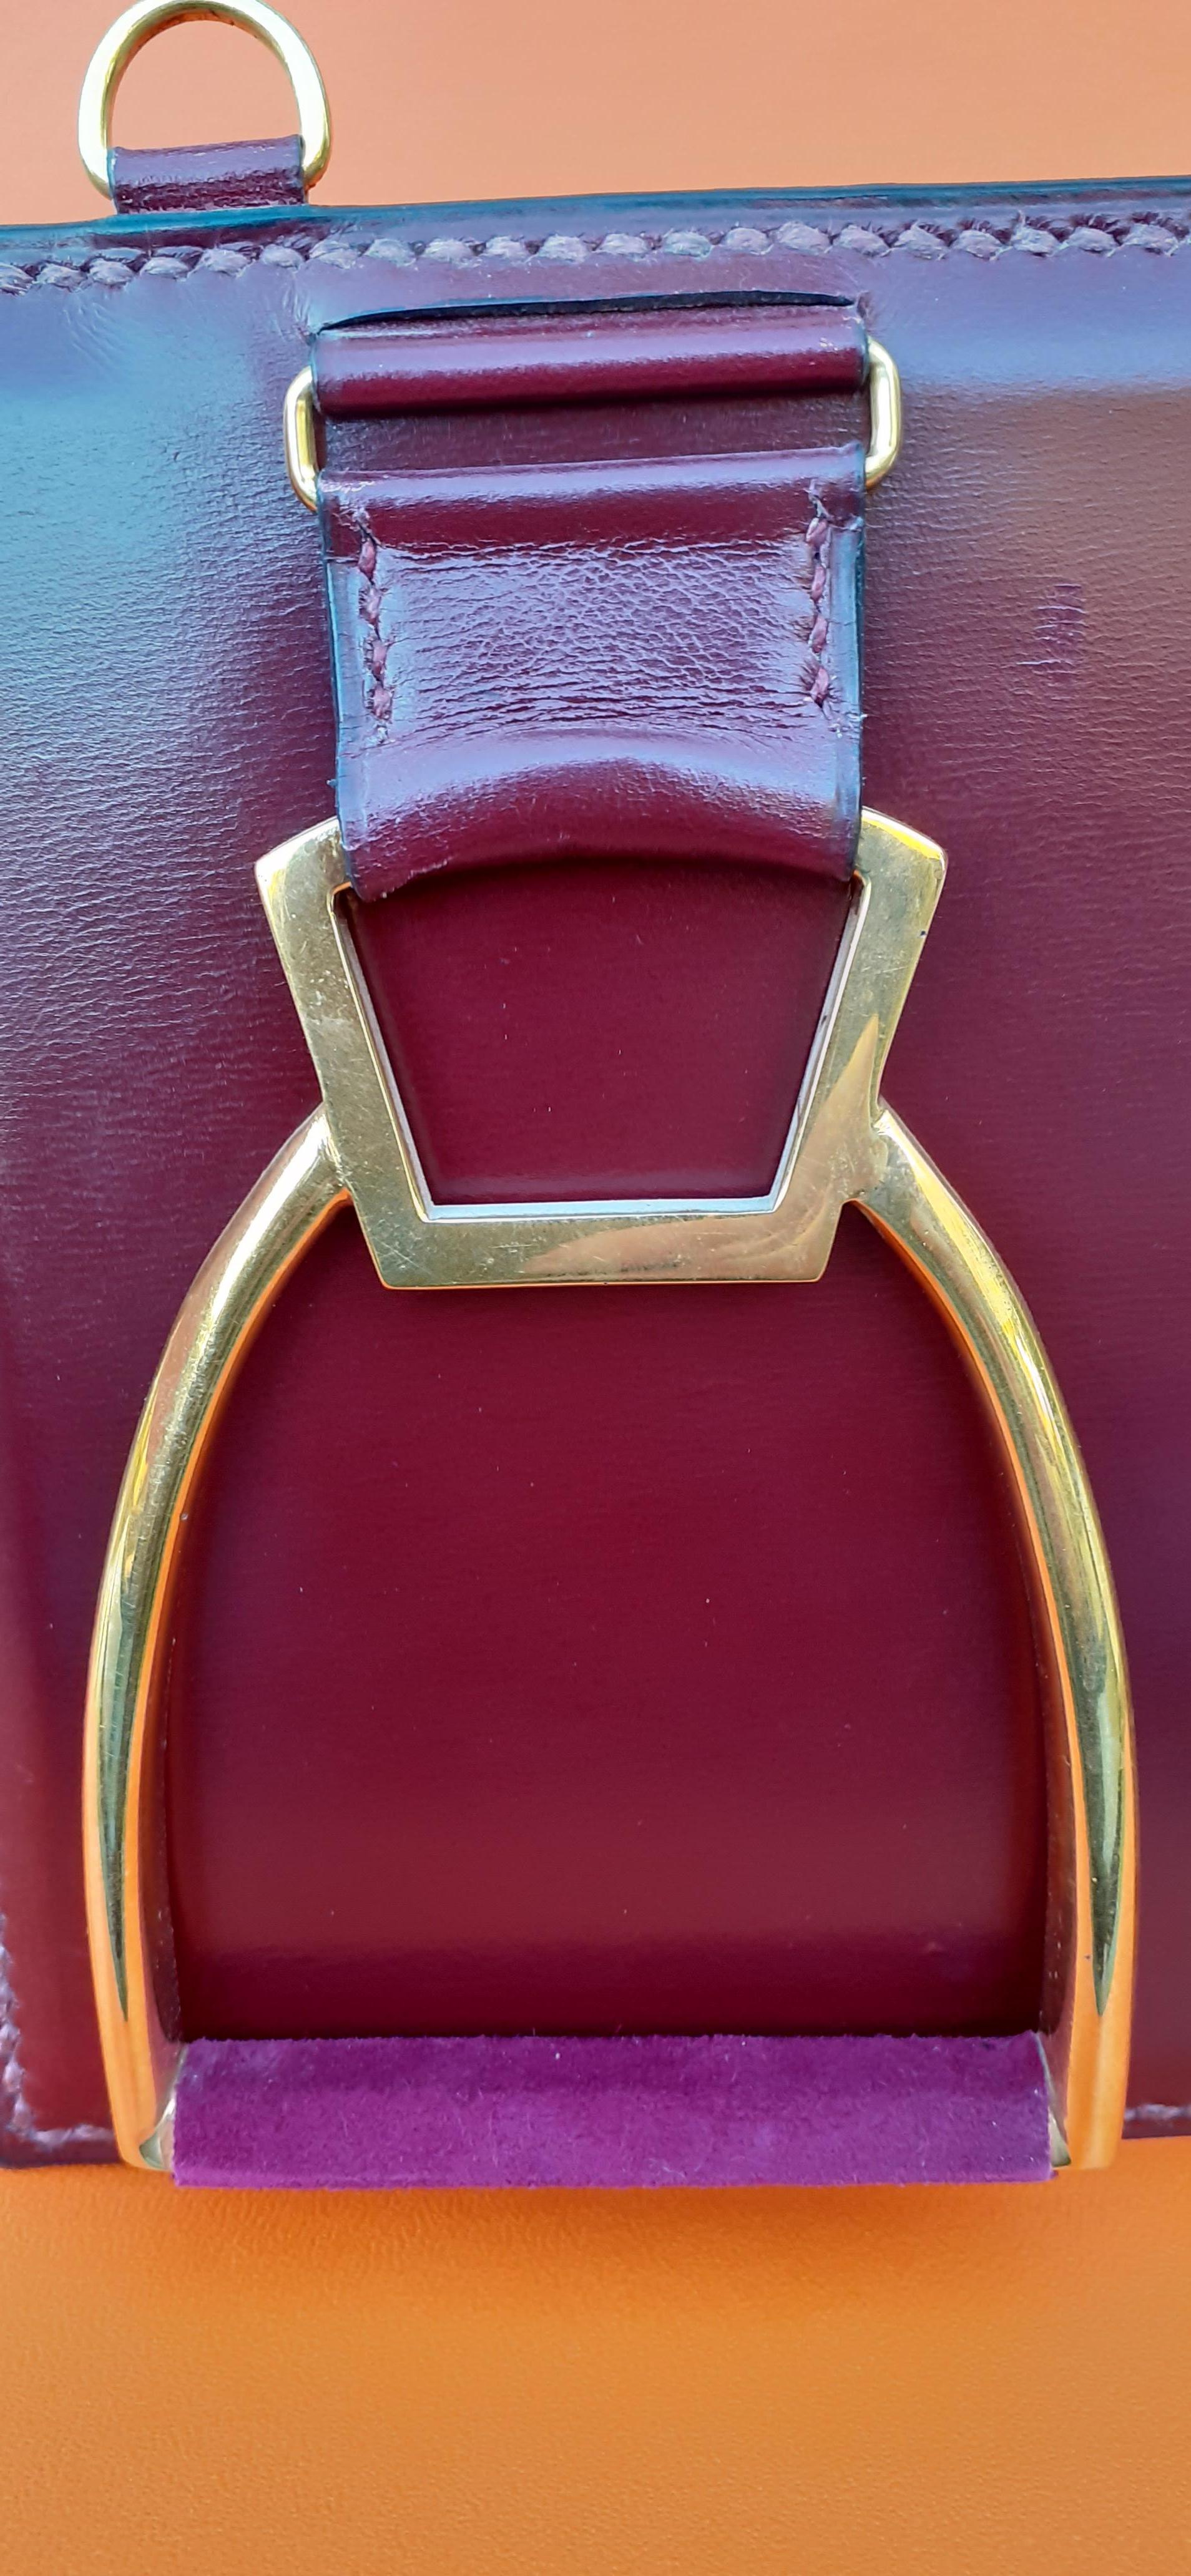 Exceptional Hermès Tie Hanger Tie Rack 3 Stirrups in Metal and Leather For Sale 3